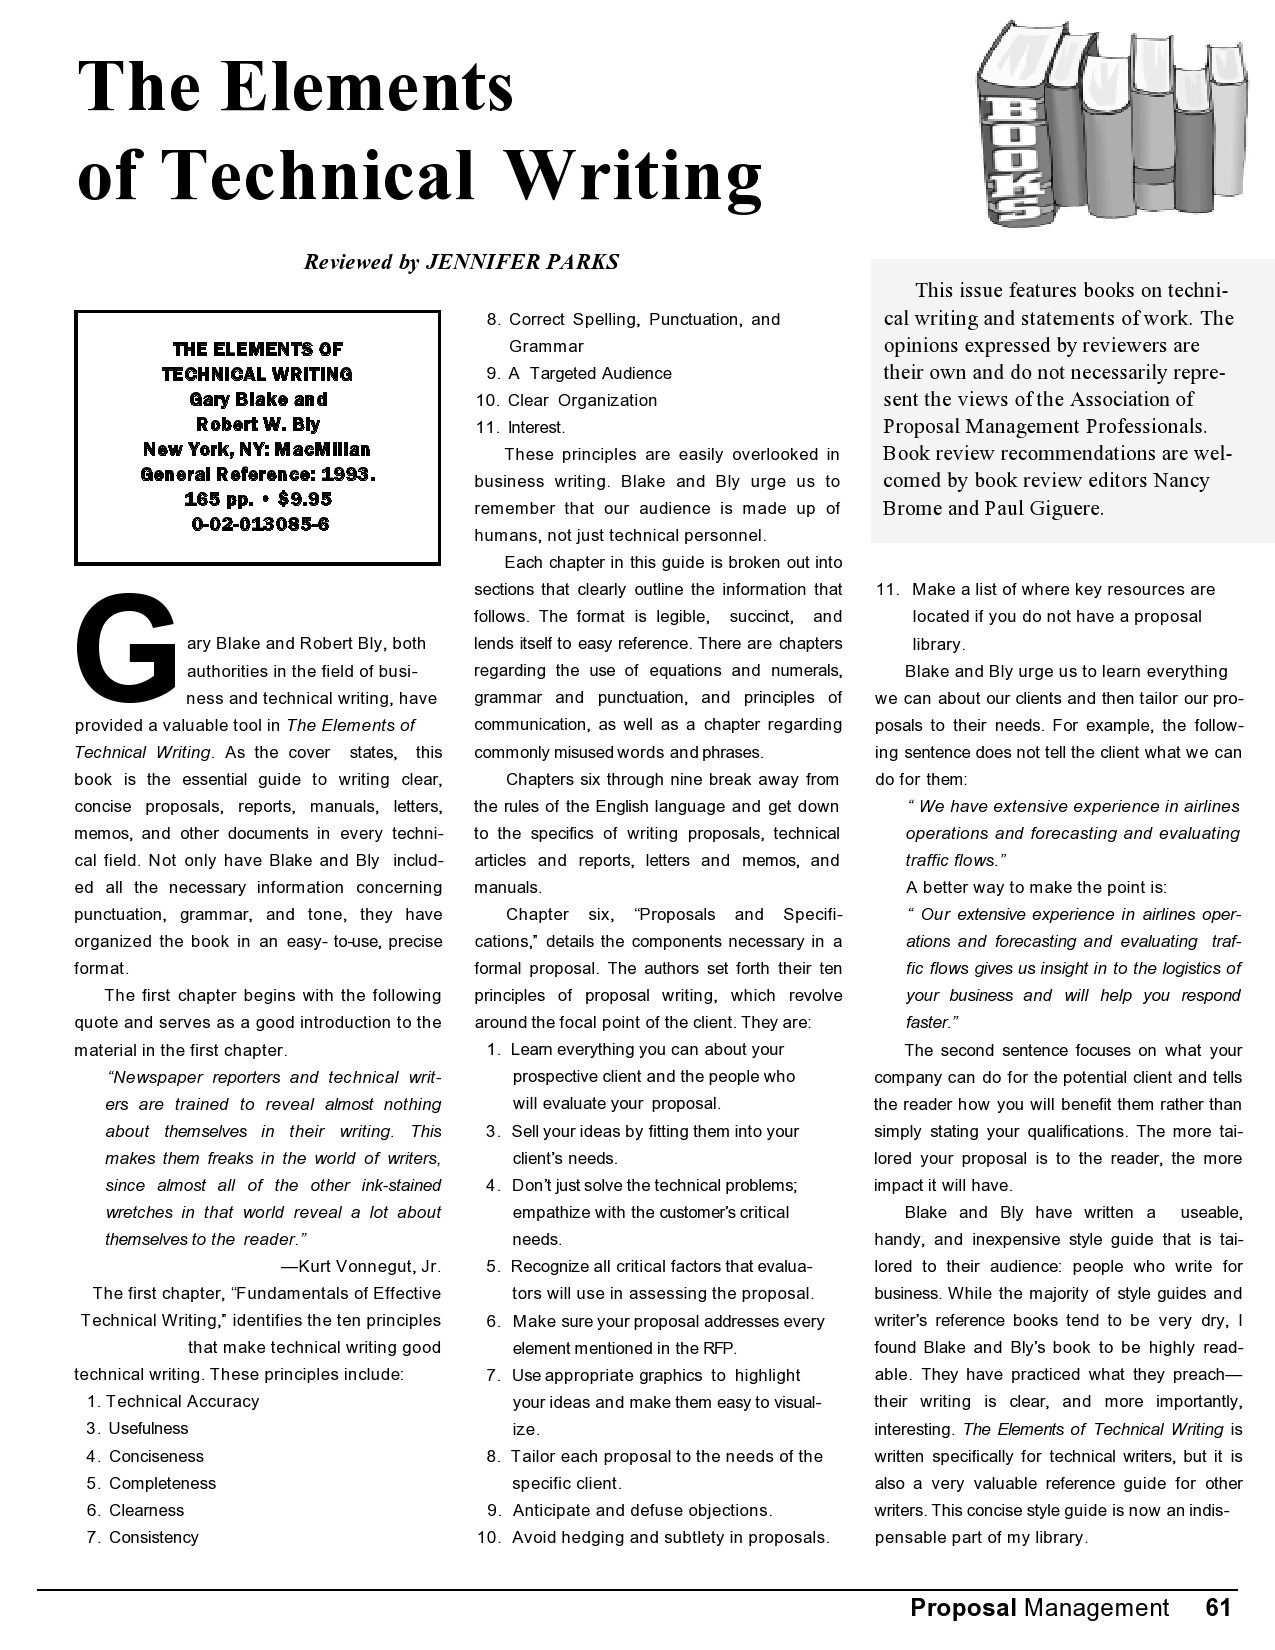 example of a good technical essay